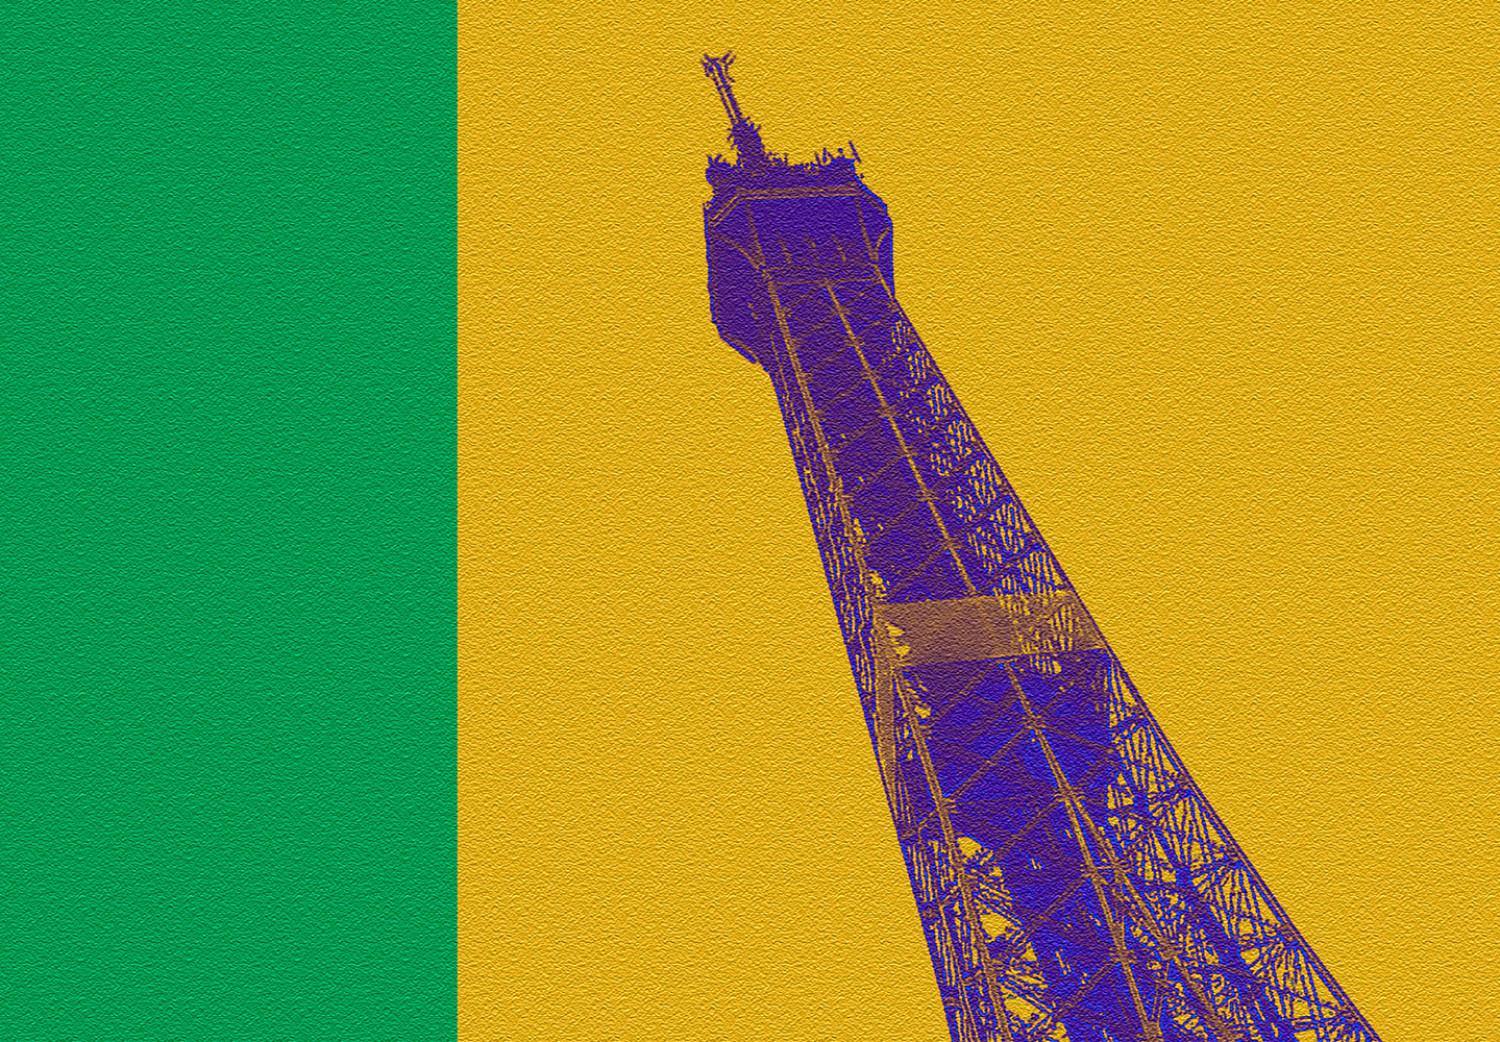 Póster Colorful Paris - Collage With Eiffel Towers in Pop Art Style